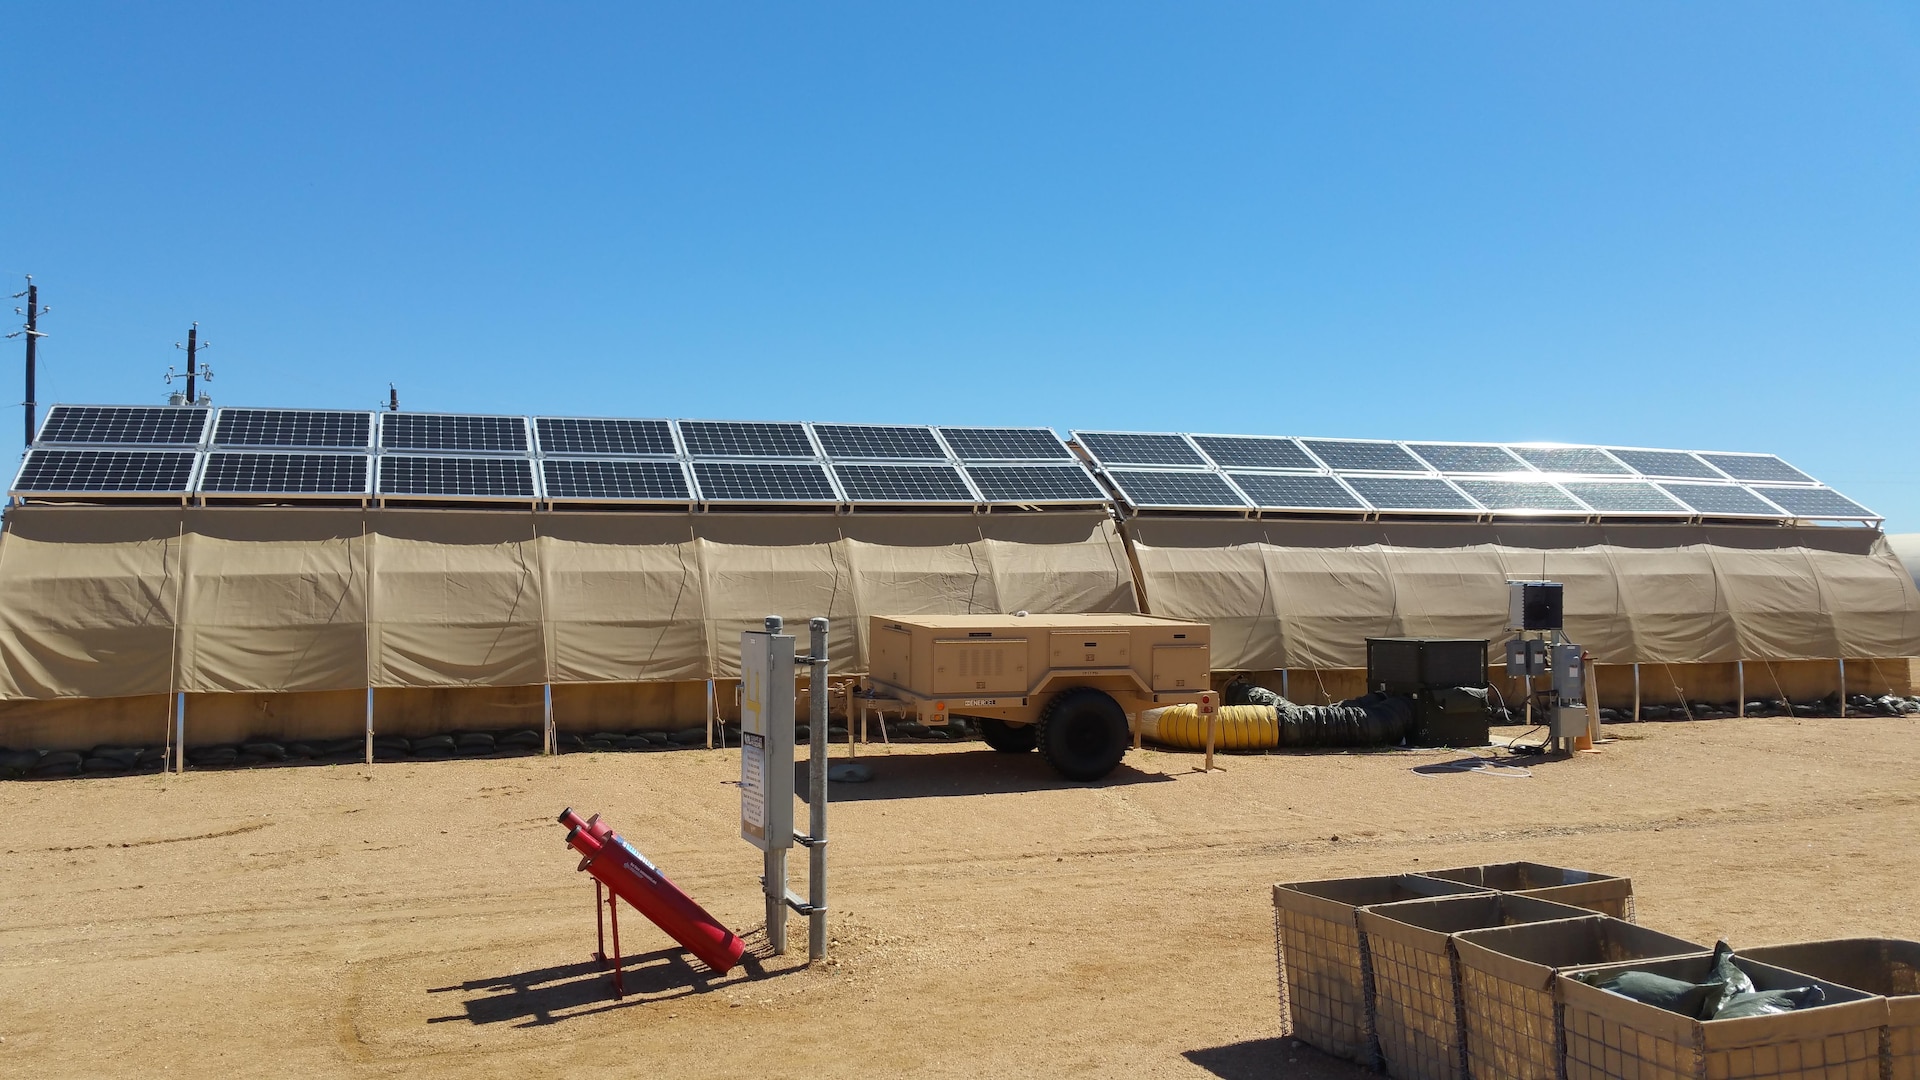 Part of AFRL's Forward Operating Base of the Future demonstration is one complete expeditionary microgrid system at Basic Expeditionary Airmen Skills Training (BEAST), Lackland AFB, San Antonio, Texas. Monocrystalline silicon solar panels are placed on top of each tent for energy production. A trailer (center) holds the hardware, software and lithium ion batteries that form the smart grid and provide energy backup should the grid fail. The project evaluates energy reduction technologies such as shelter insulation and efficient HVACs. (U.S. Air Force photo/Jason Goins)